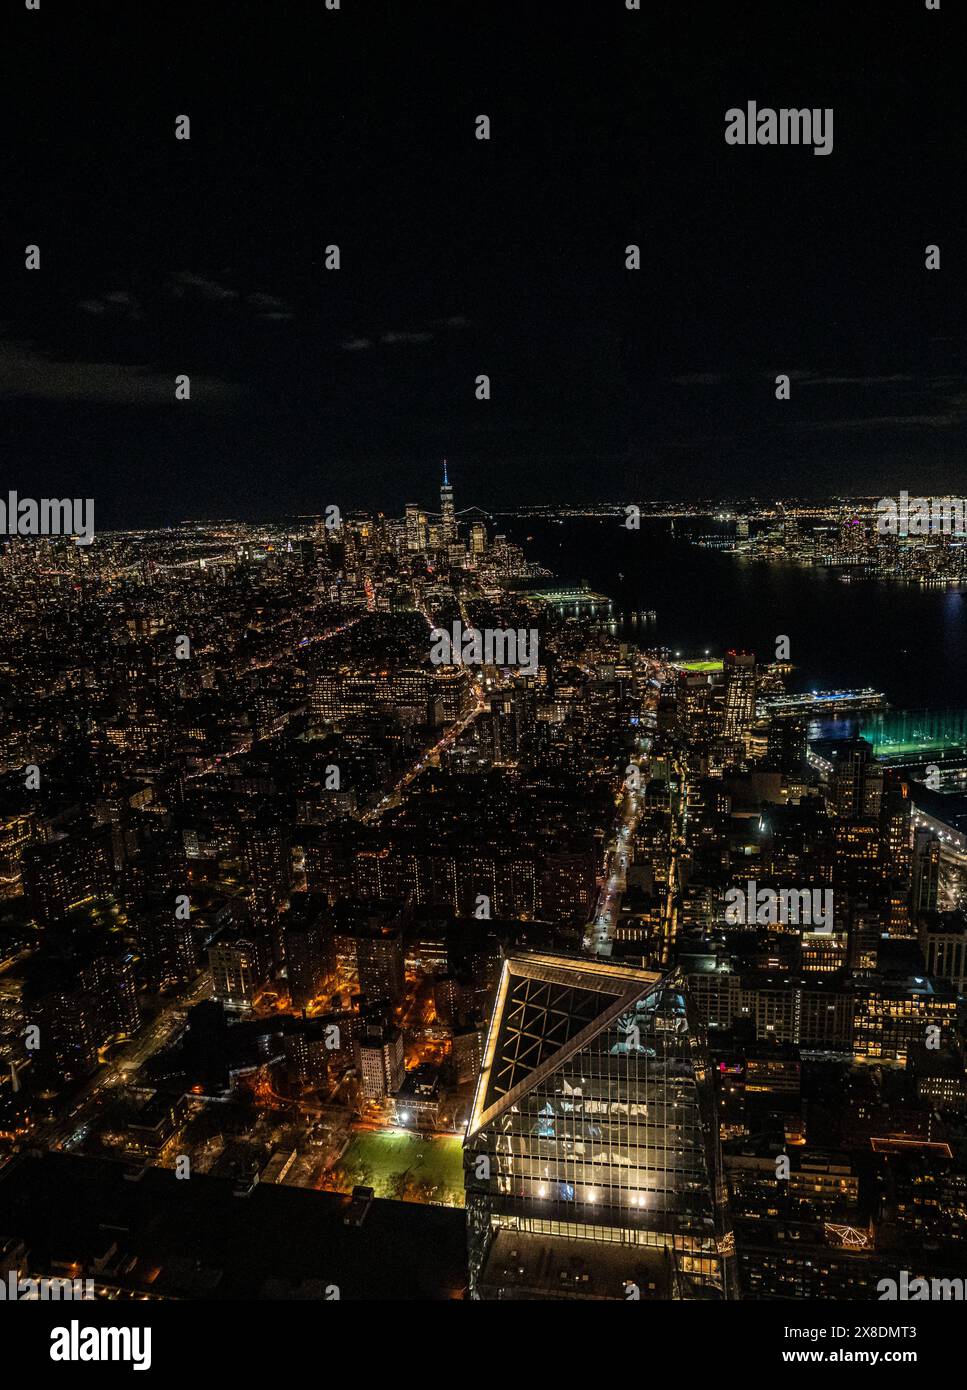 Manhattan's night skyline from a daring perspective from above. Towering giants pierce the clouds, offering a unique vantage point for travel. Stock Photo